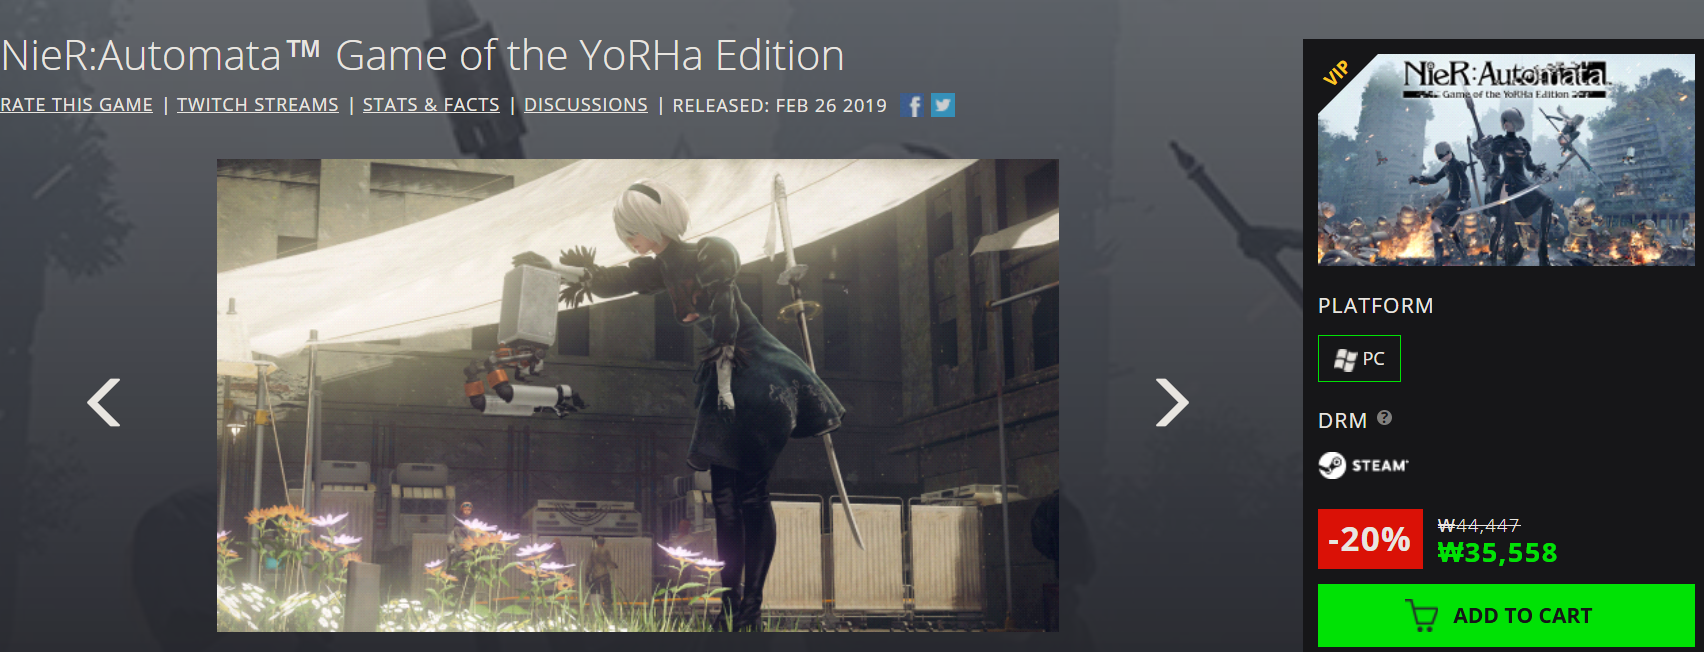 Screenshot_2019-02-27 NieR Automata™ Game of the YoRHa Edition PC - Steam Game Keys.png